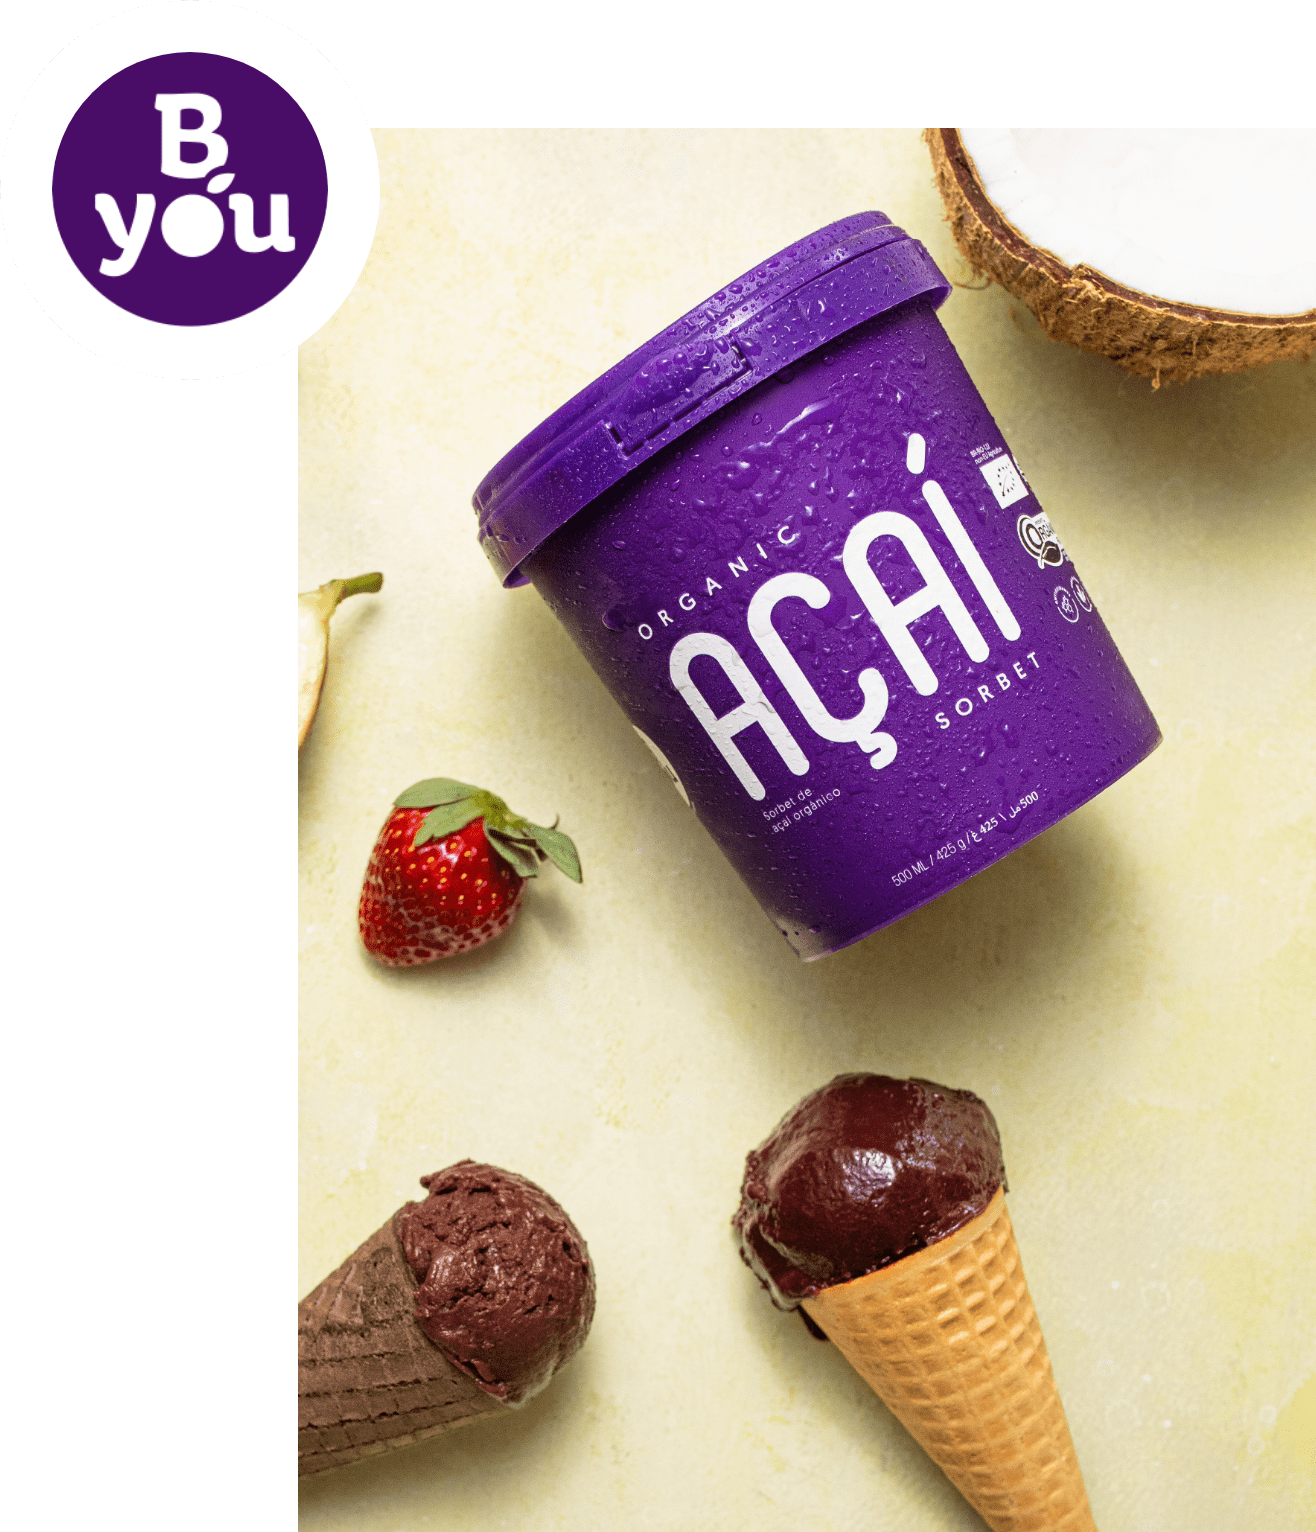 Açaí supplier and açai distributor in Belgium and surrounding countries of brand Byou